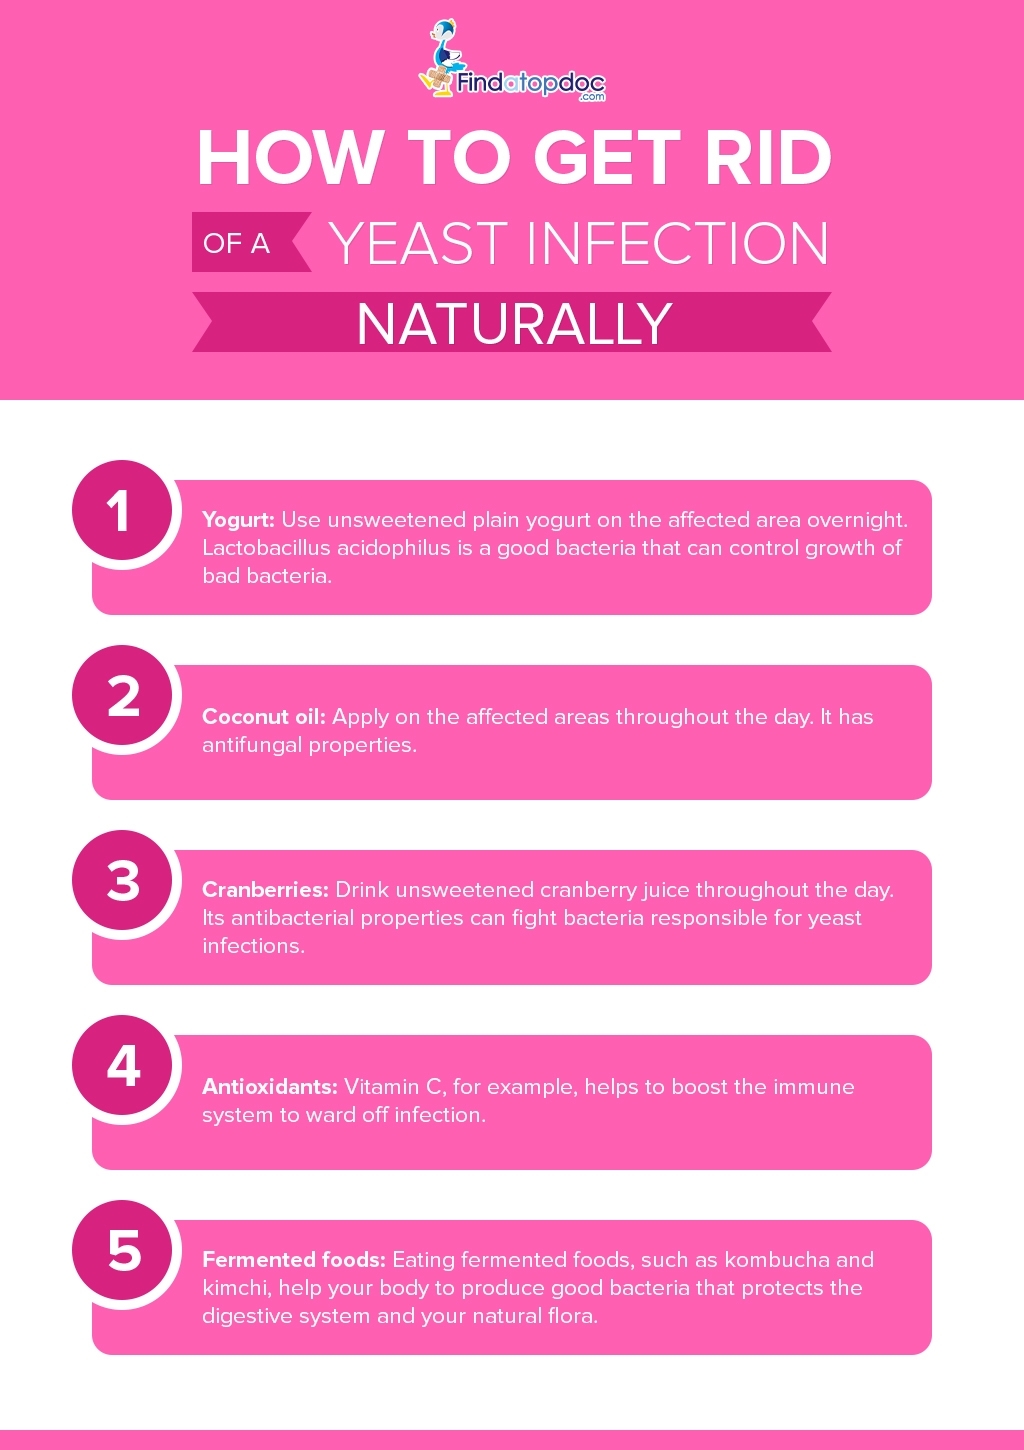 How To Get Rid Of A Yeast Infection Naturally [infographic]